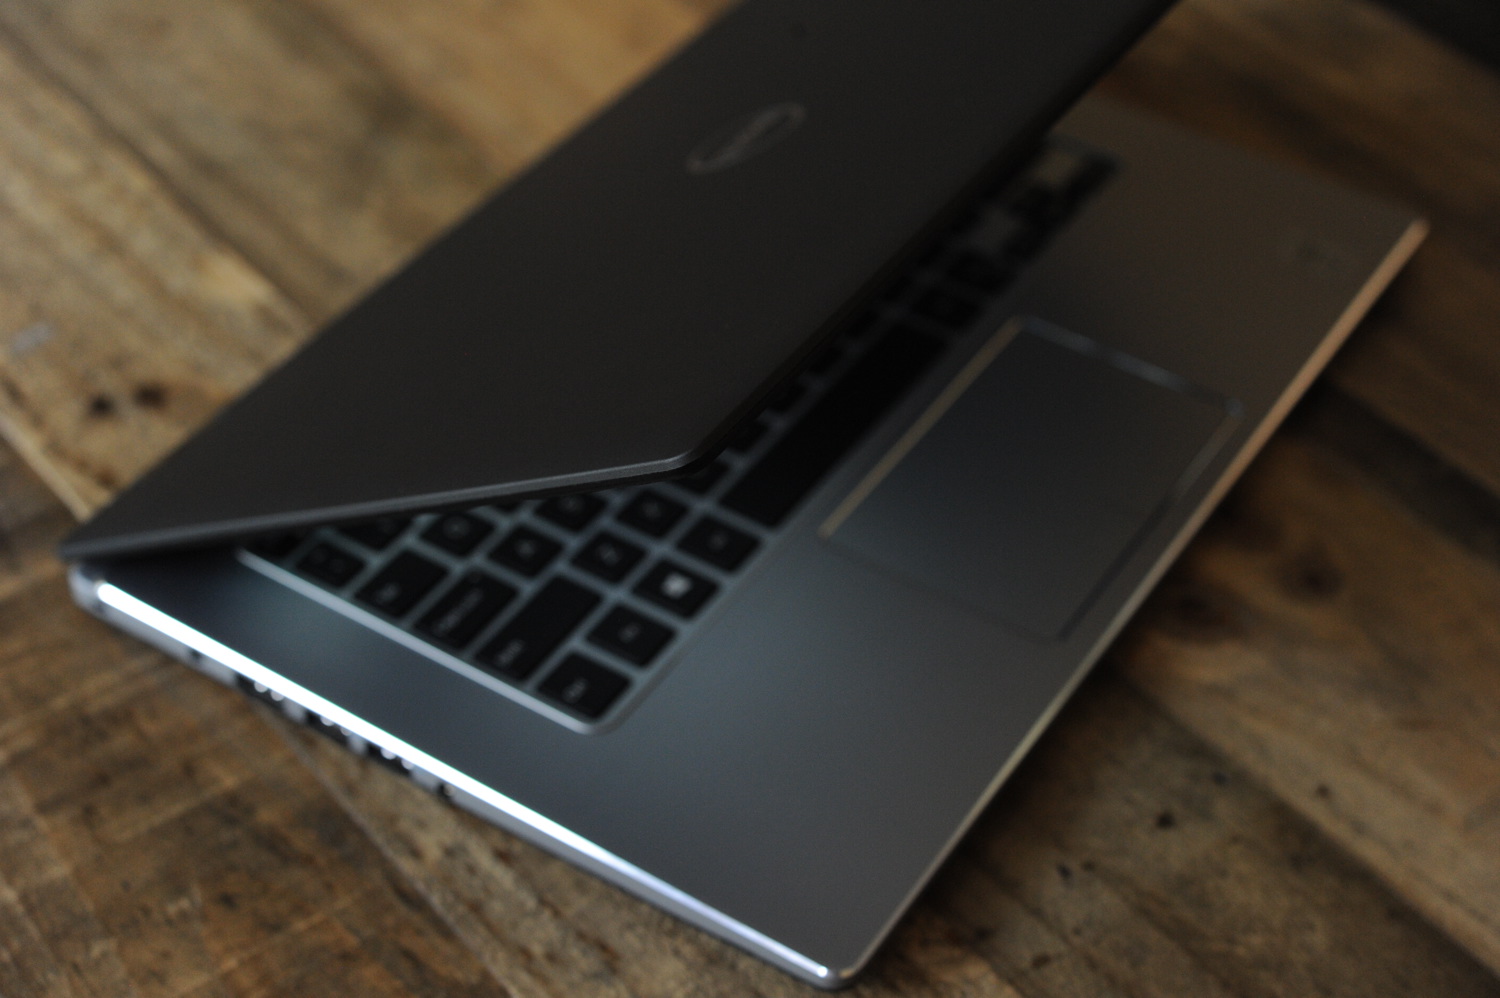 Dell Inspiron 13 7000 Special Edition 2-in-1 Review | HotHardware